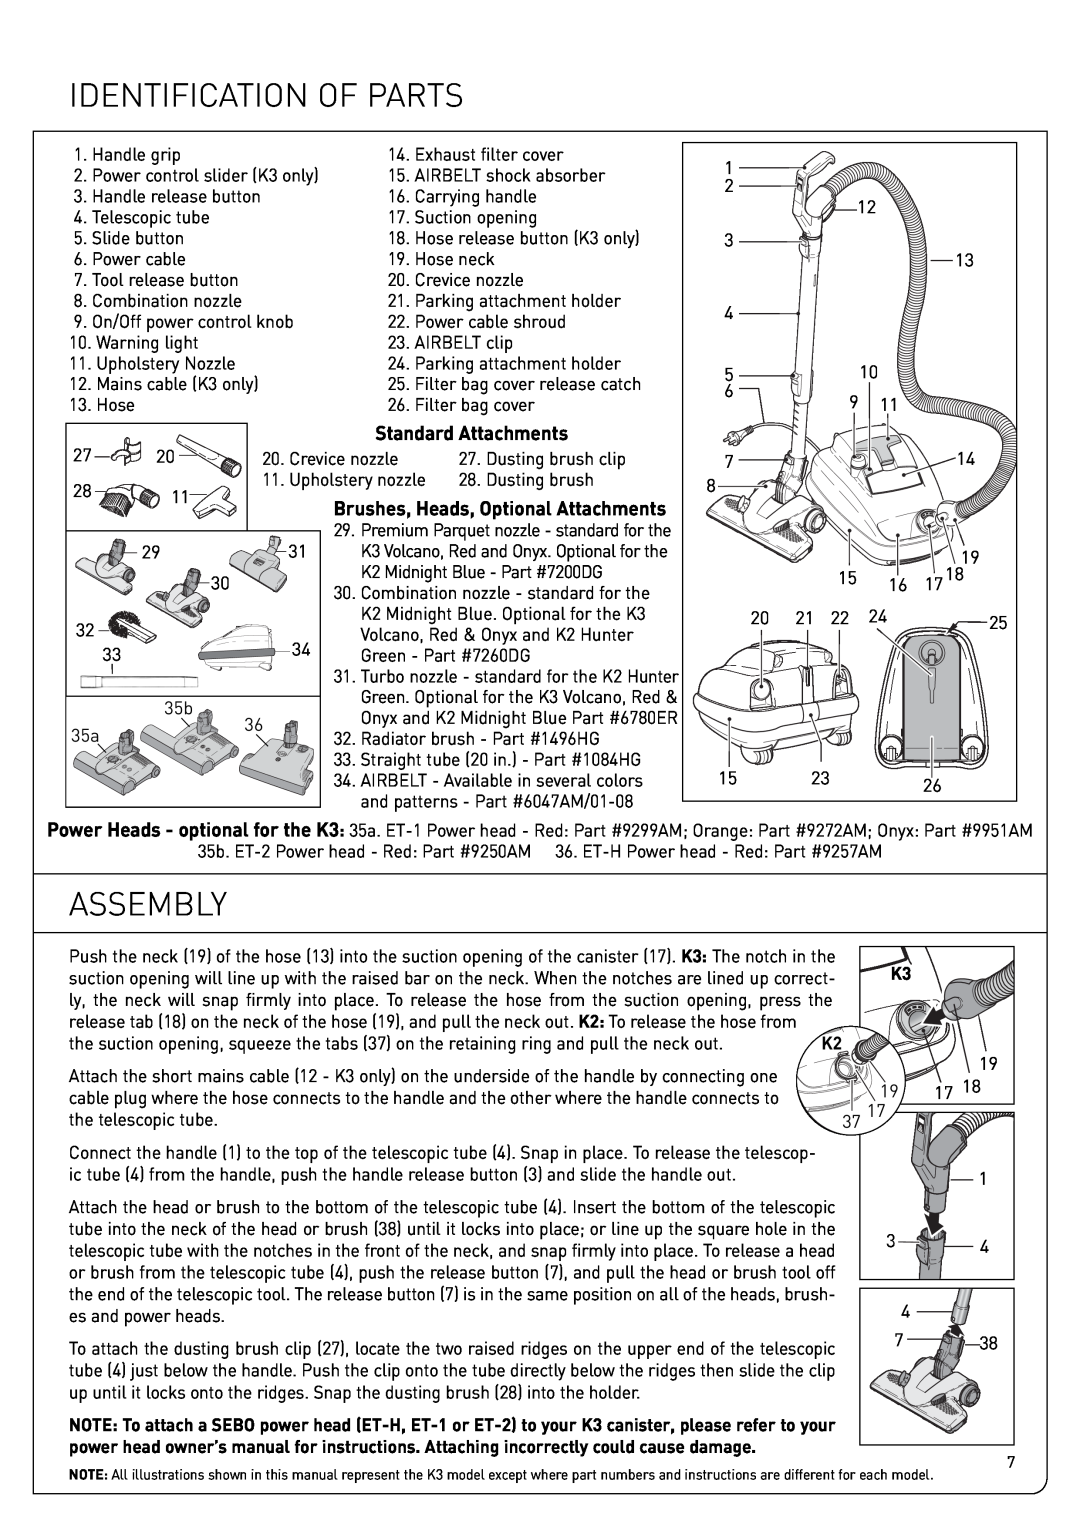 Sebo K2, K3 owner manual Identification Of Parts, Assembly, Standard Attachments 